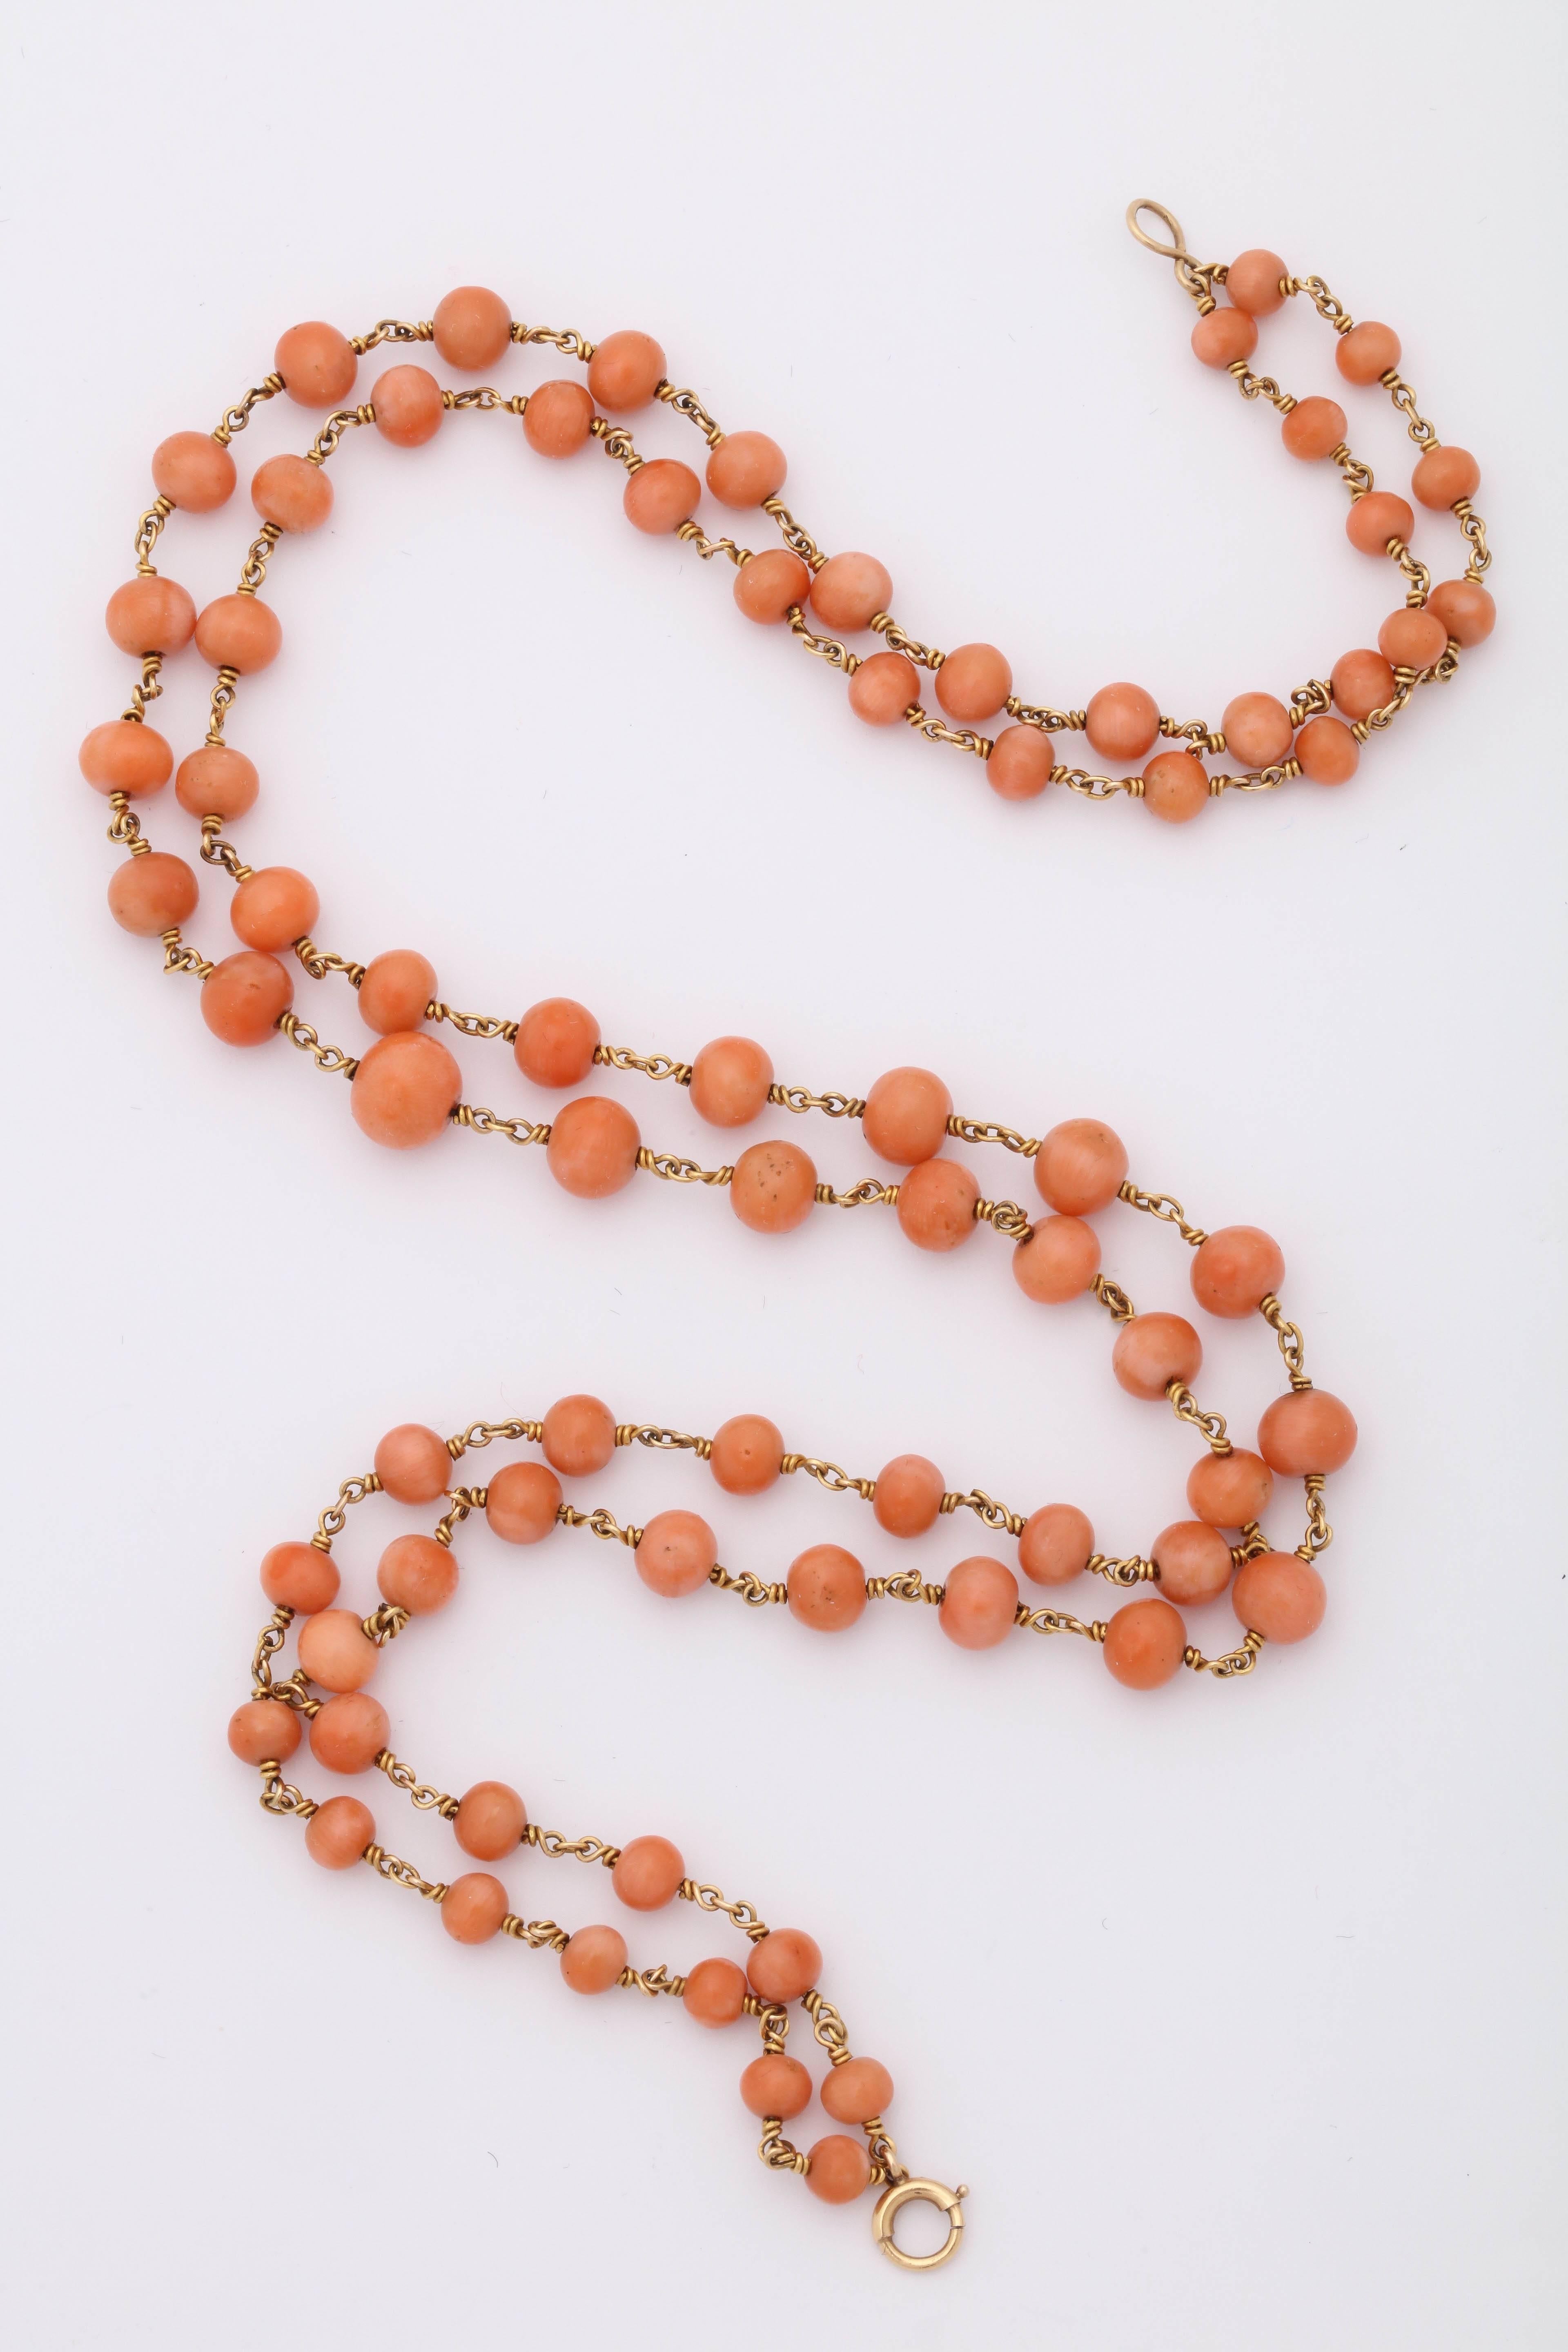 One Ladies 14kt Yellow Gold Double Strand Coral Necklace Consisting Of 78 Coral Beads Ranging From 2mm to 8mm. NOTE: Necklace May Be Worn As A Single Long Strand.Designed In The 1940's In The United States Of America.